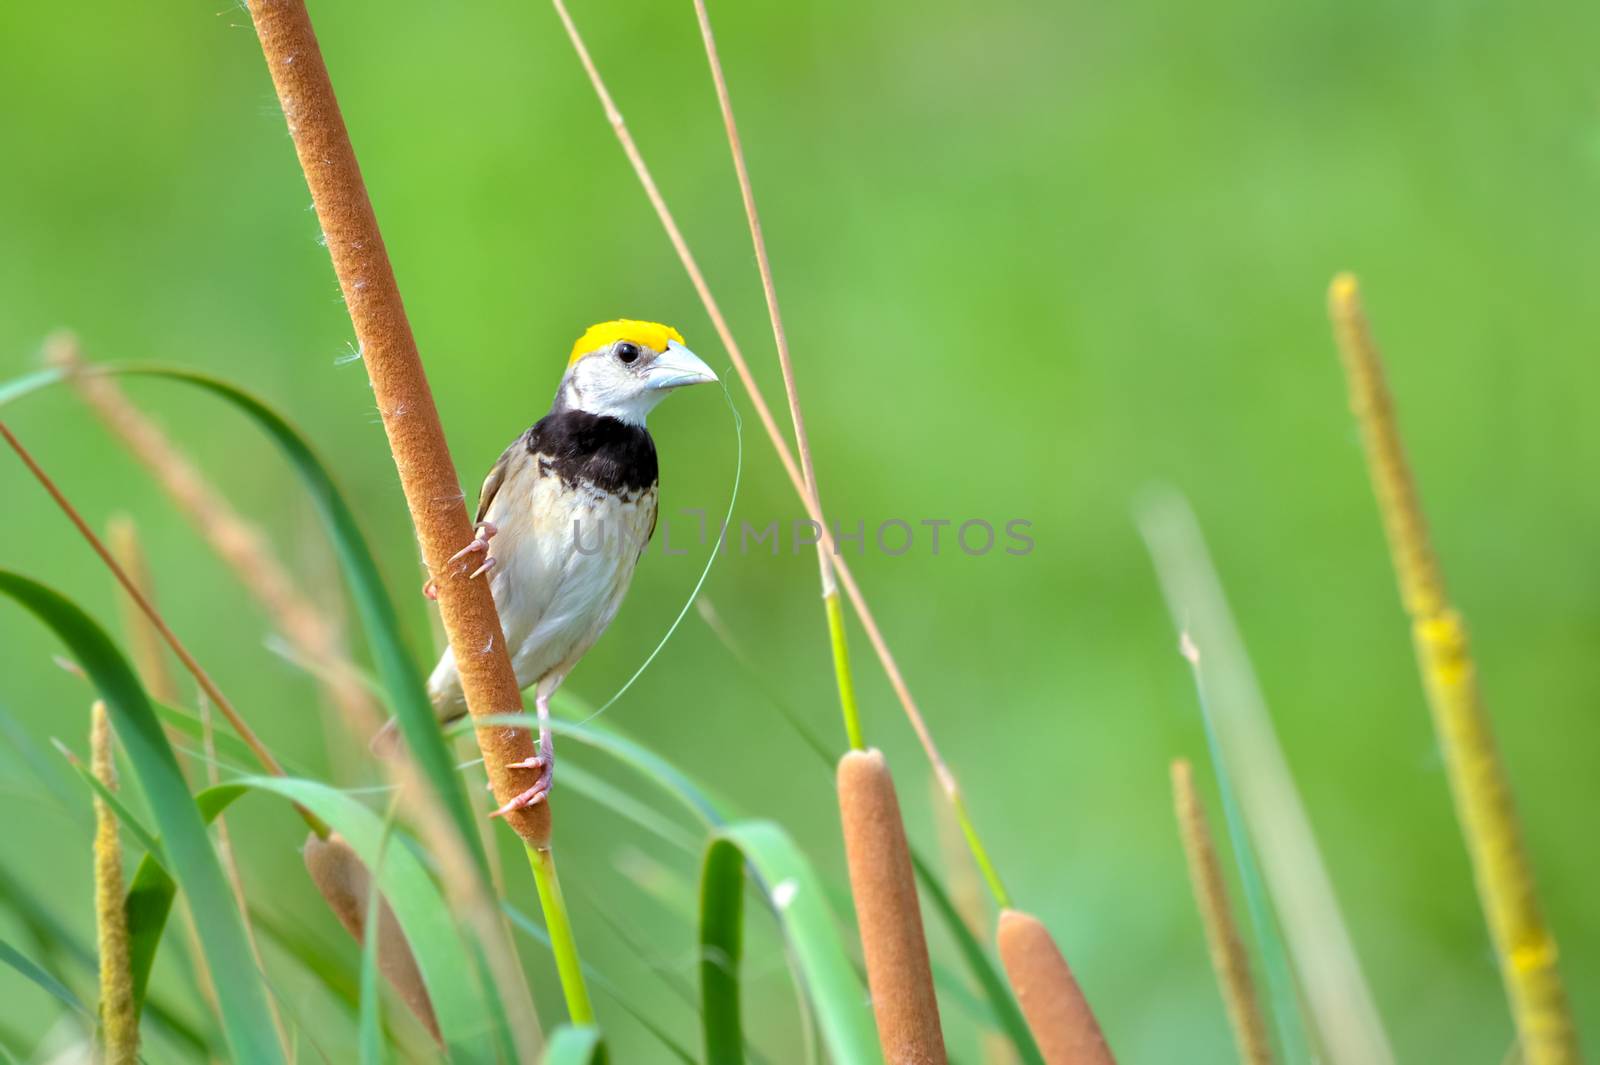 The black-breasted weaver, also known as the Bengal weaver or black-throated weaver, is a weaver resident in the northern river plains of the Indian subcontinent.